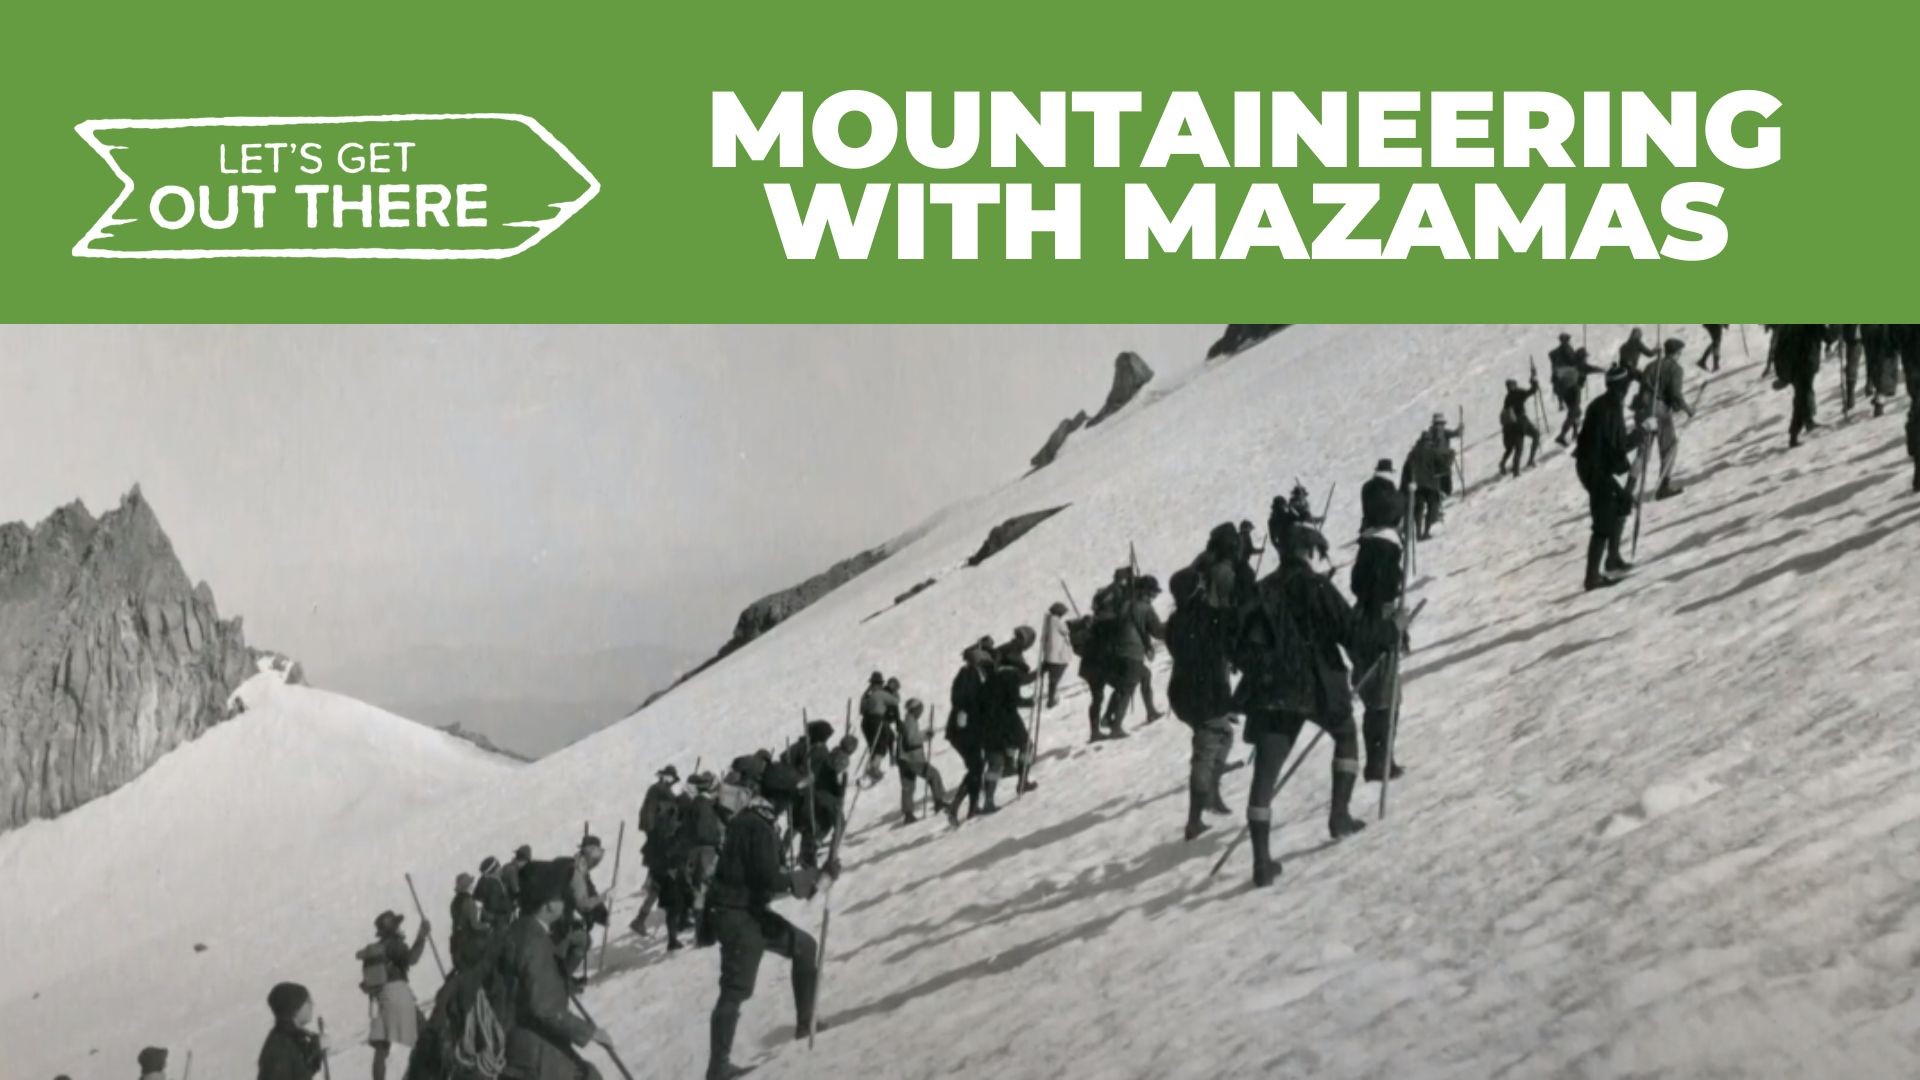 The Mazamas were officially formed at the summit of Mount Hood in 1894, inspiring people to love, protect and explore the mountains.